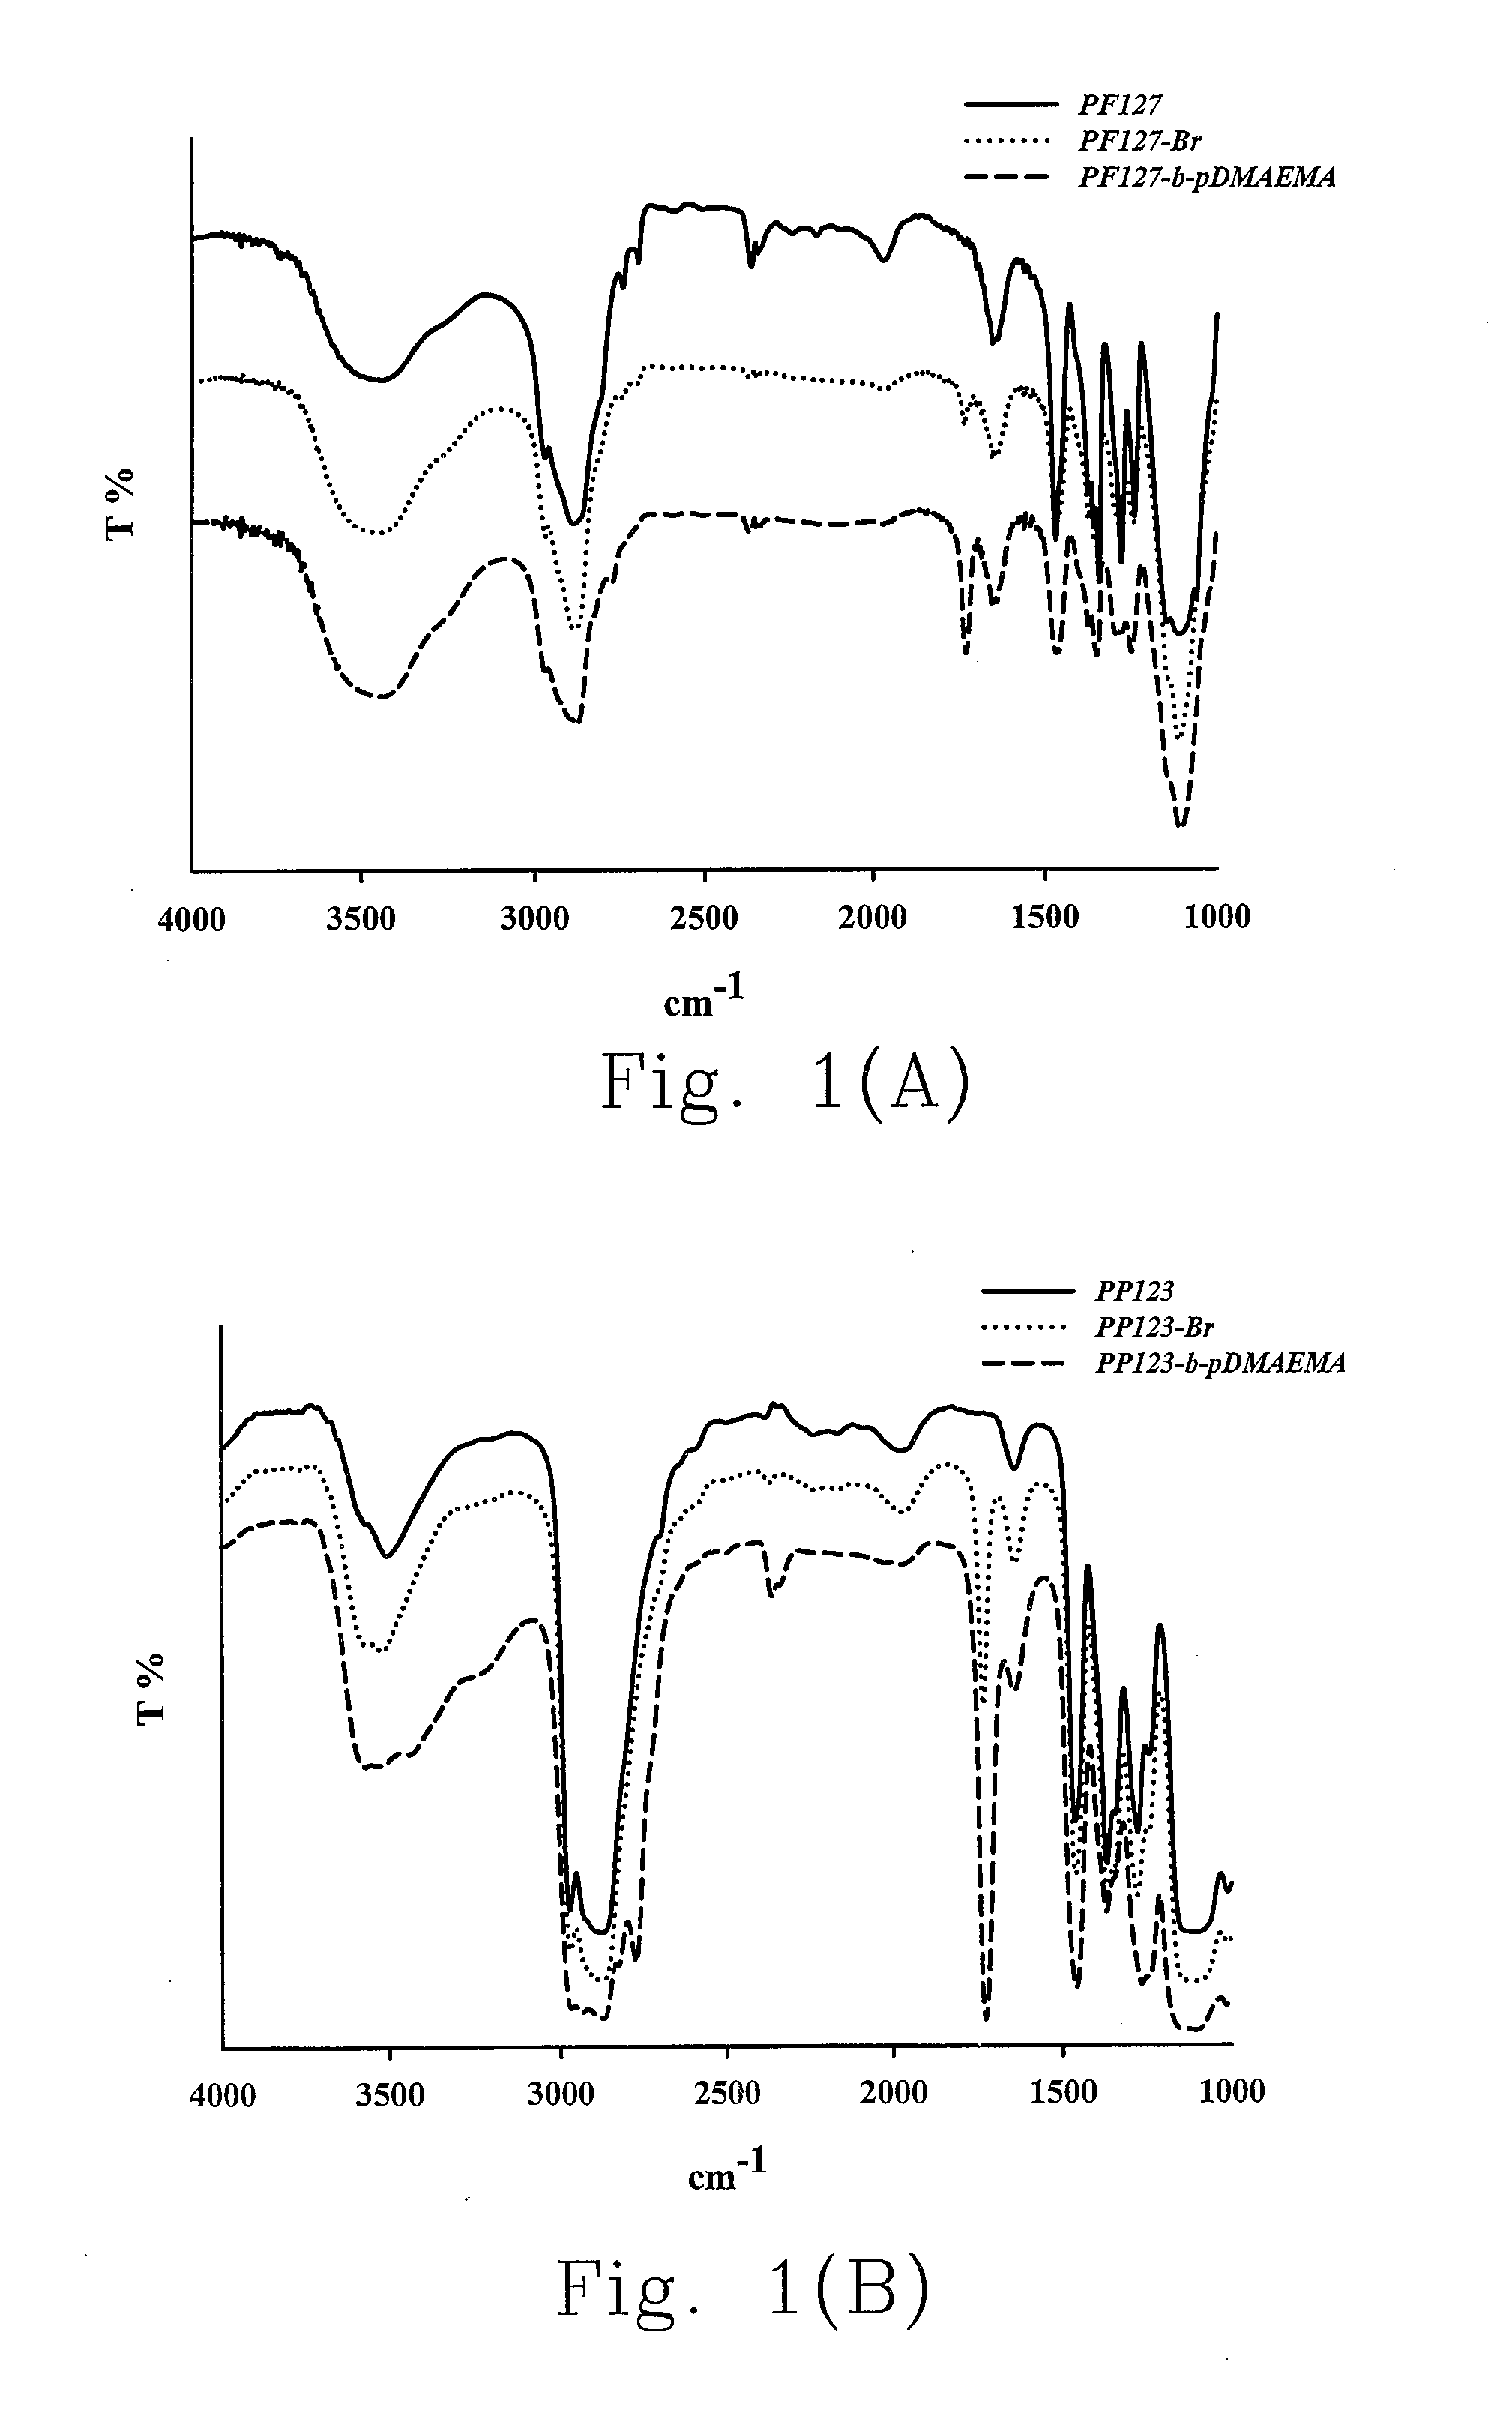 Functionalized polymer nanoparticles and the pharmaceutical use thereof